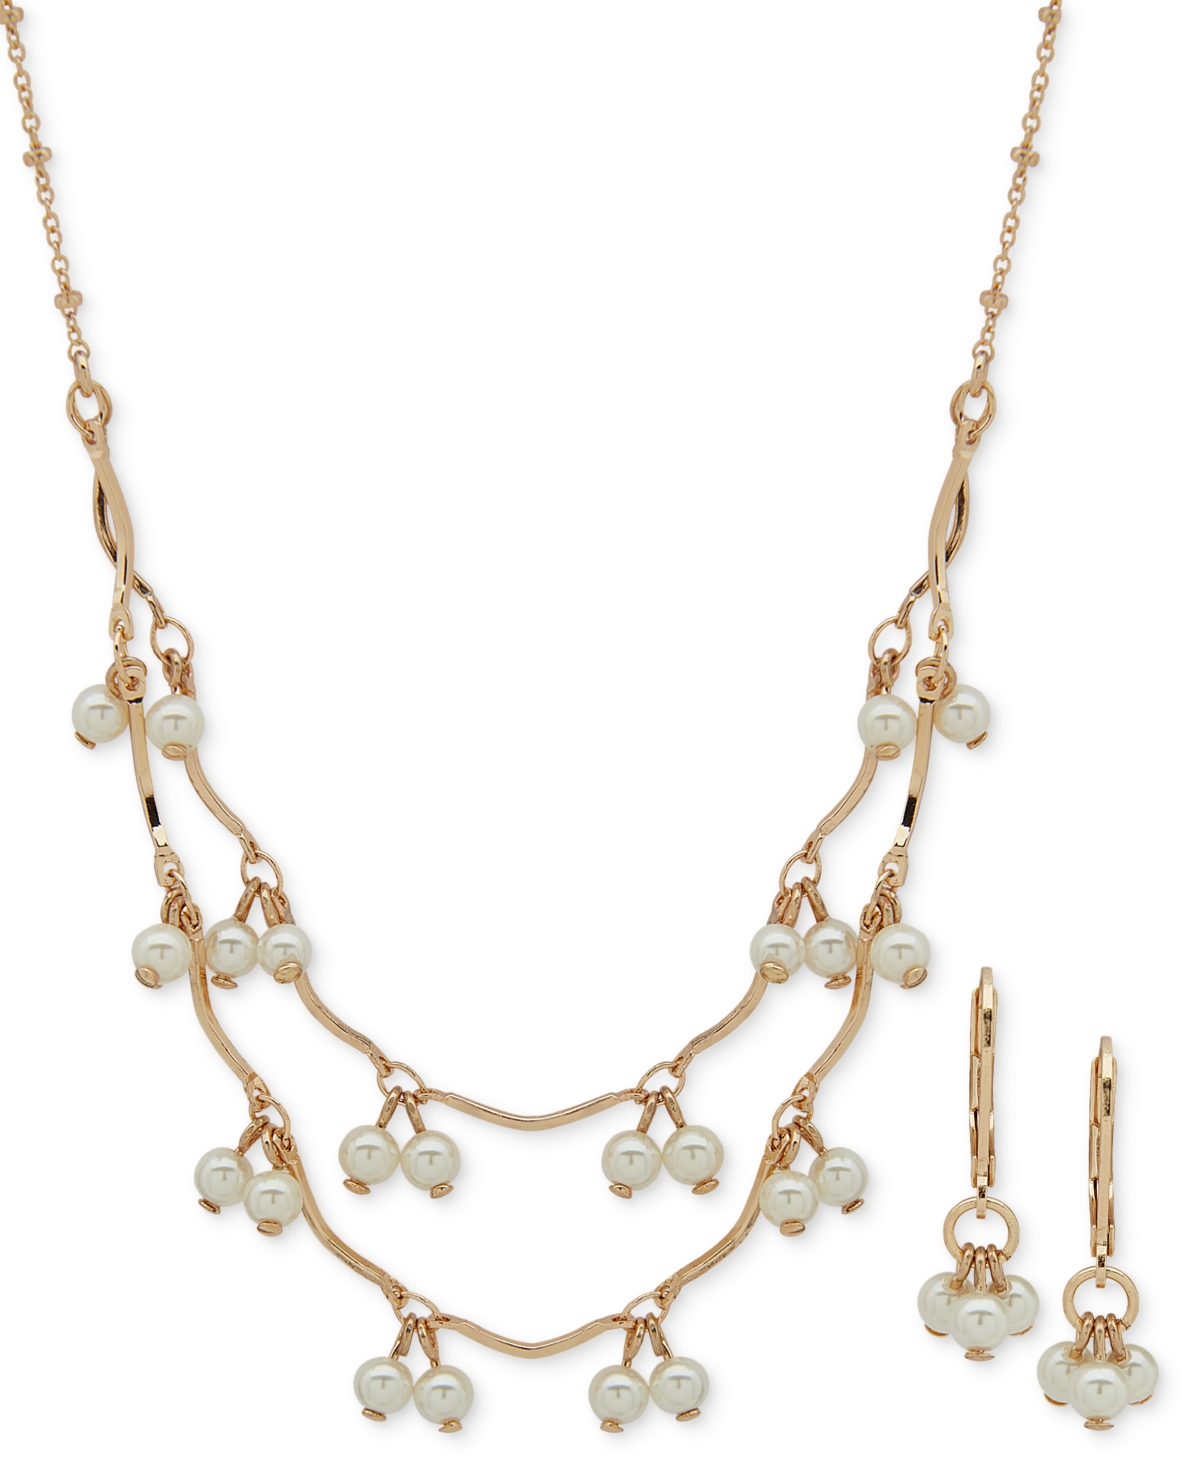 Anne Klein Gold-tone Shaky Imitation Pearl Layered Necklace & Drop Earrings Set